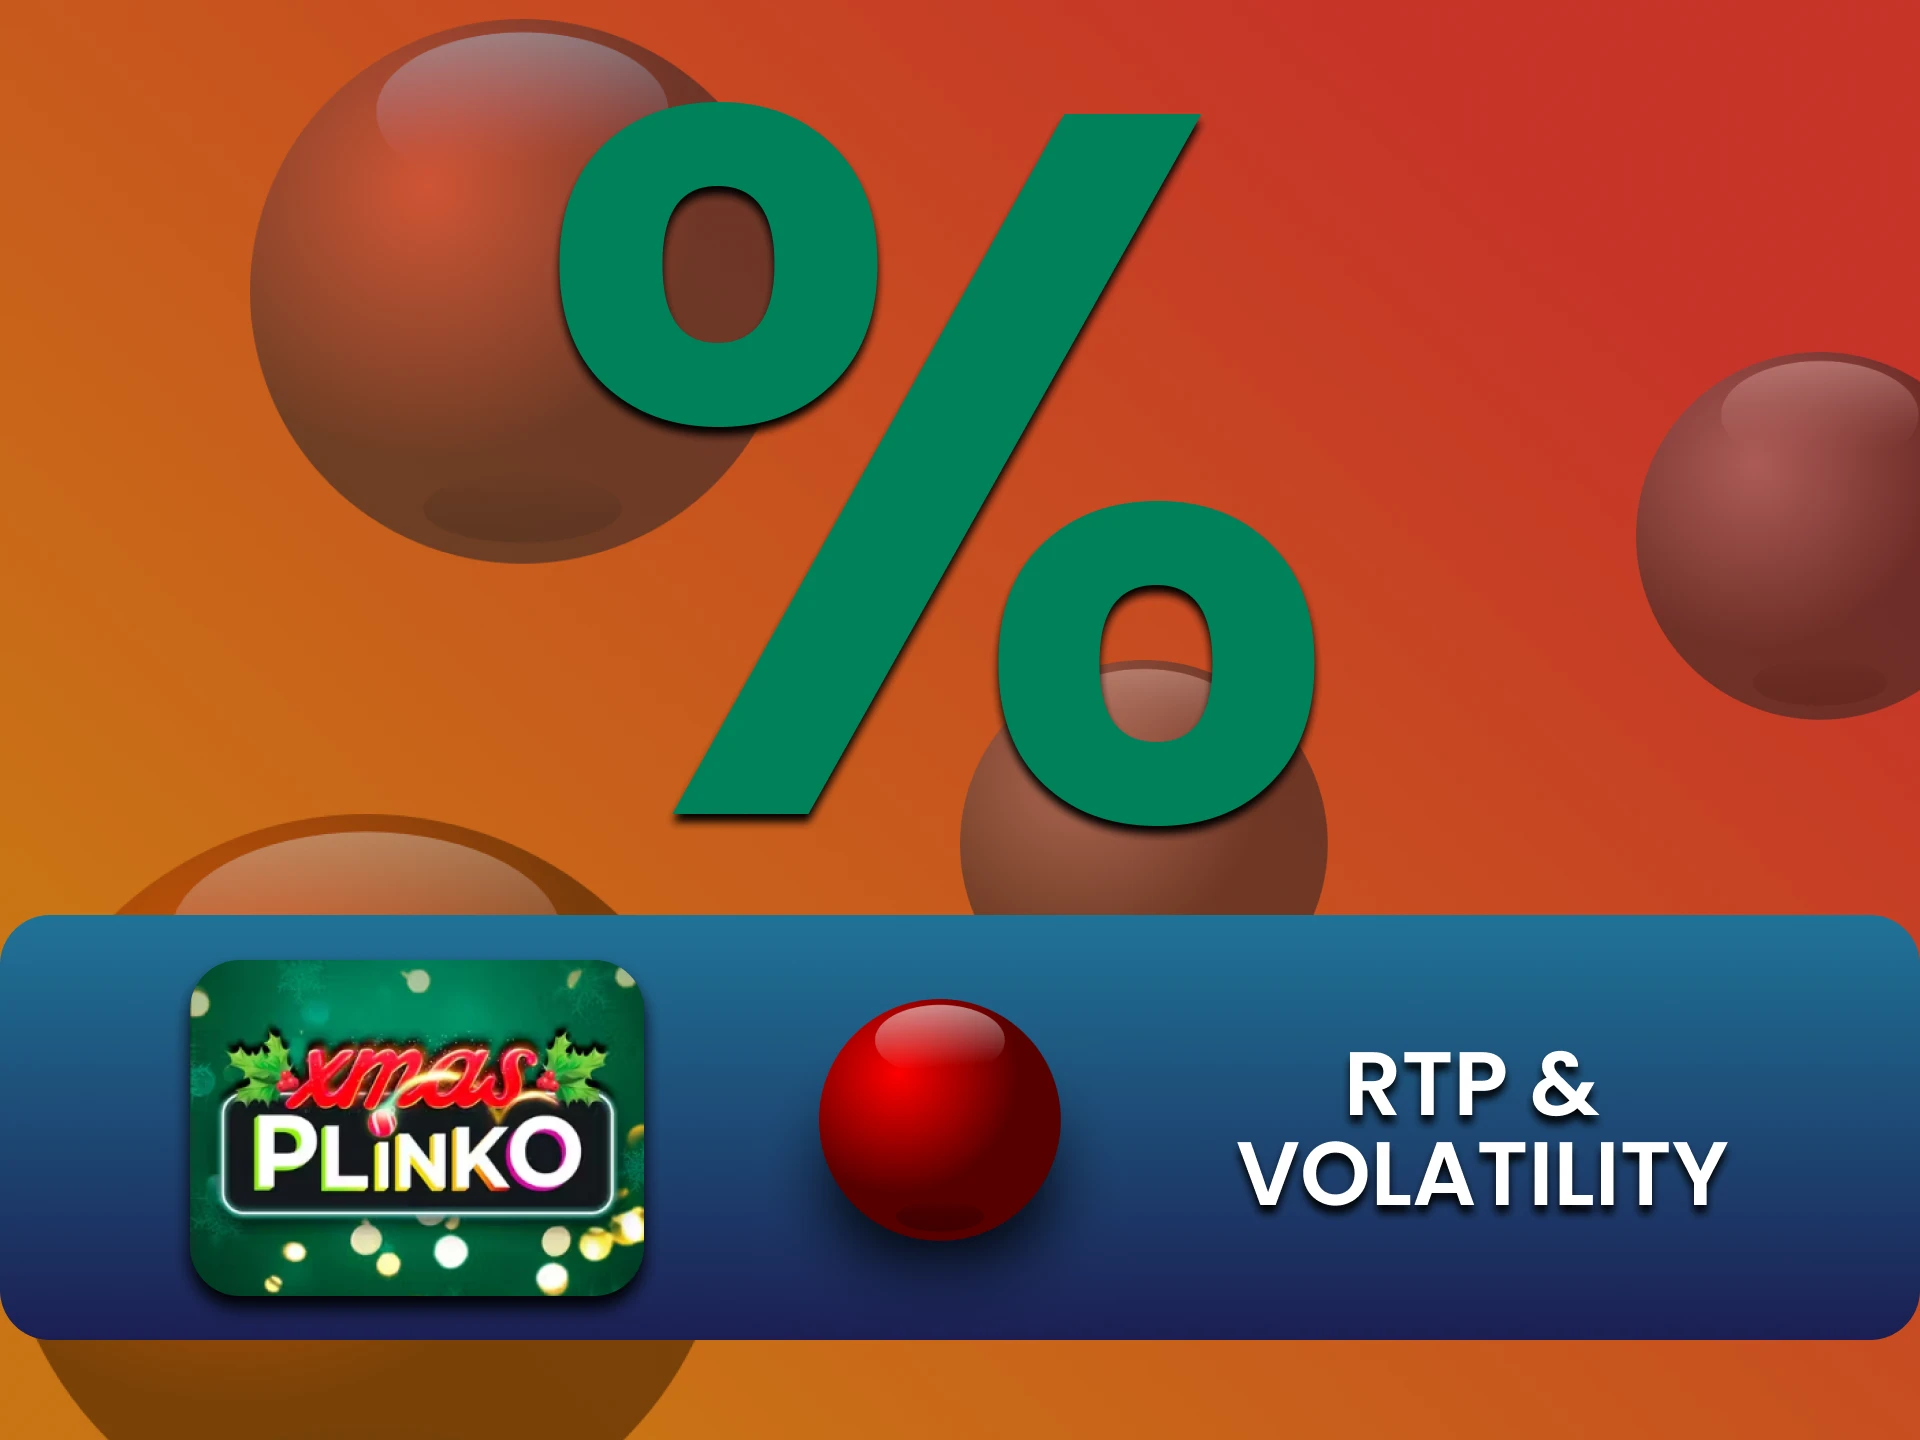 Find out the probability of winning in Plinko Xmas.